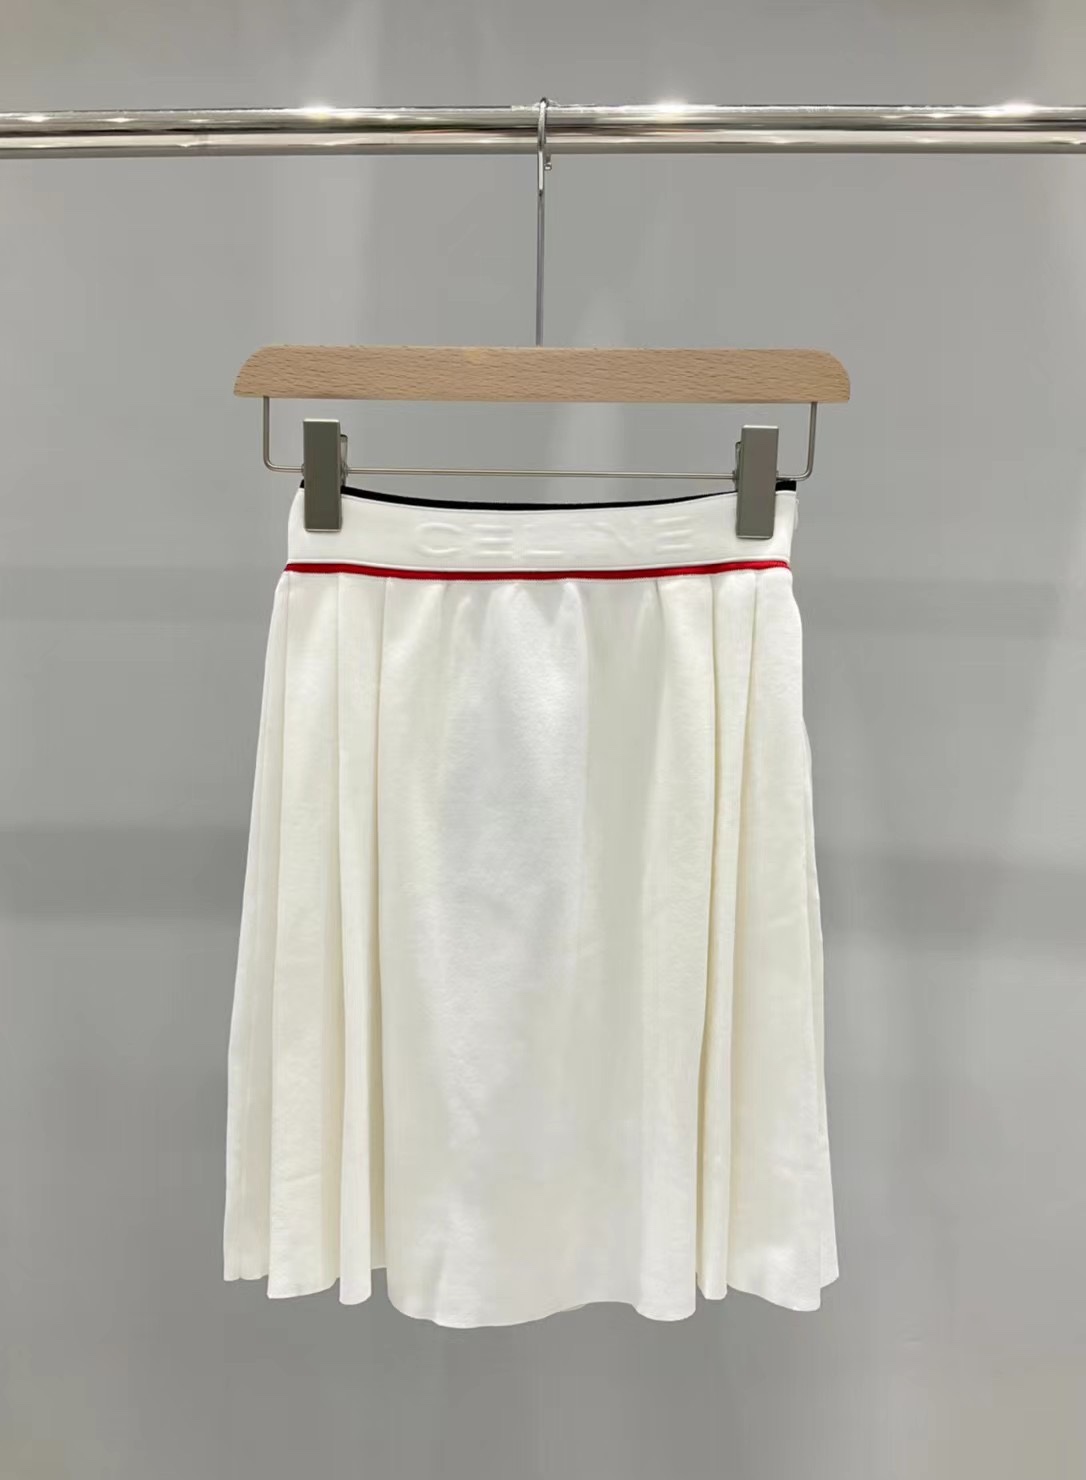 Celine Clothing Skirts Knitting Spring/Summer Collection